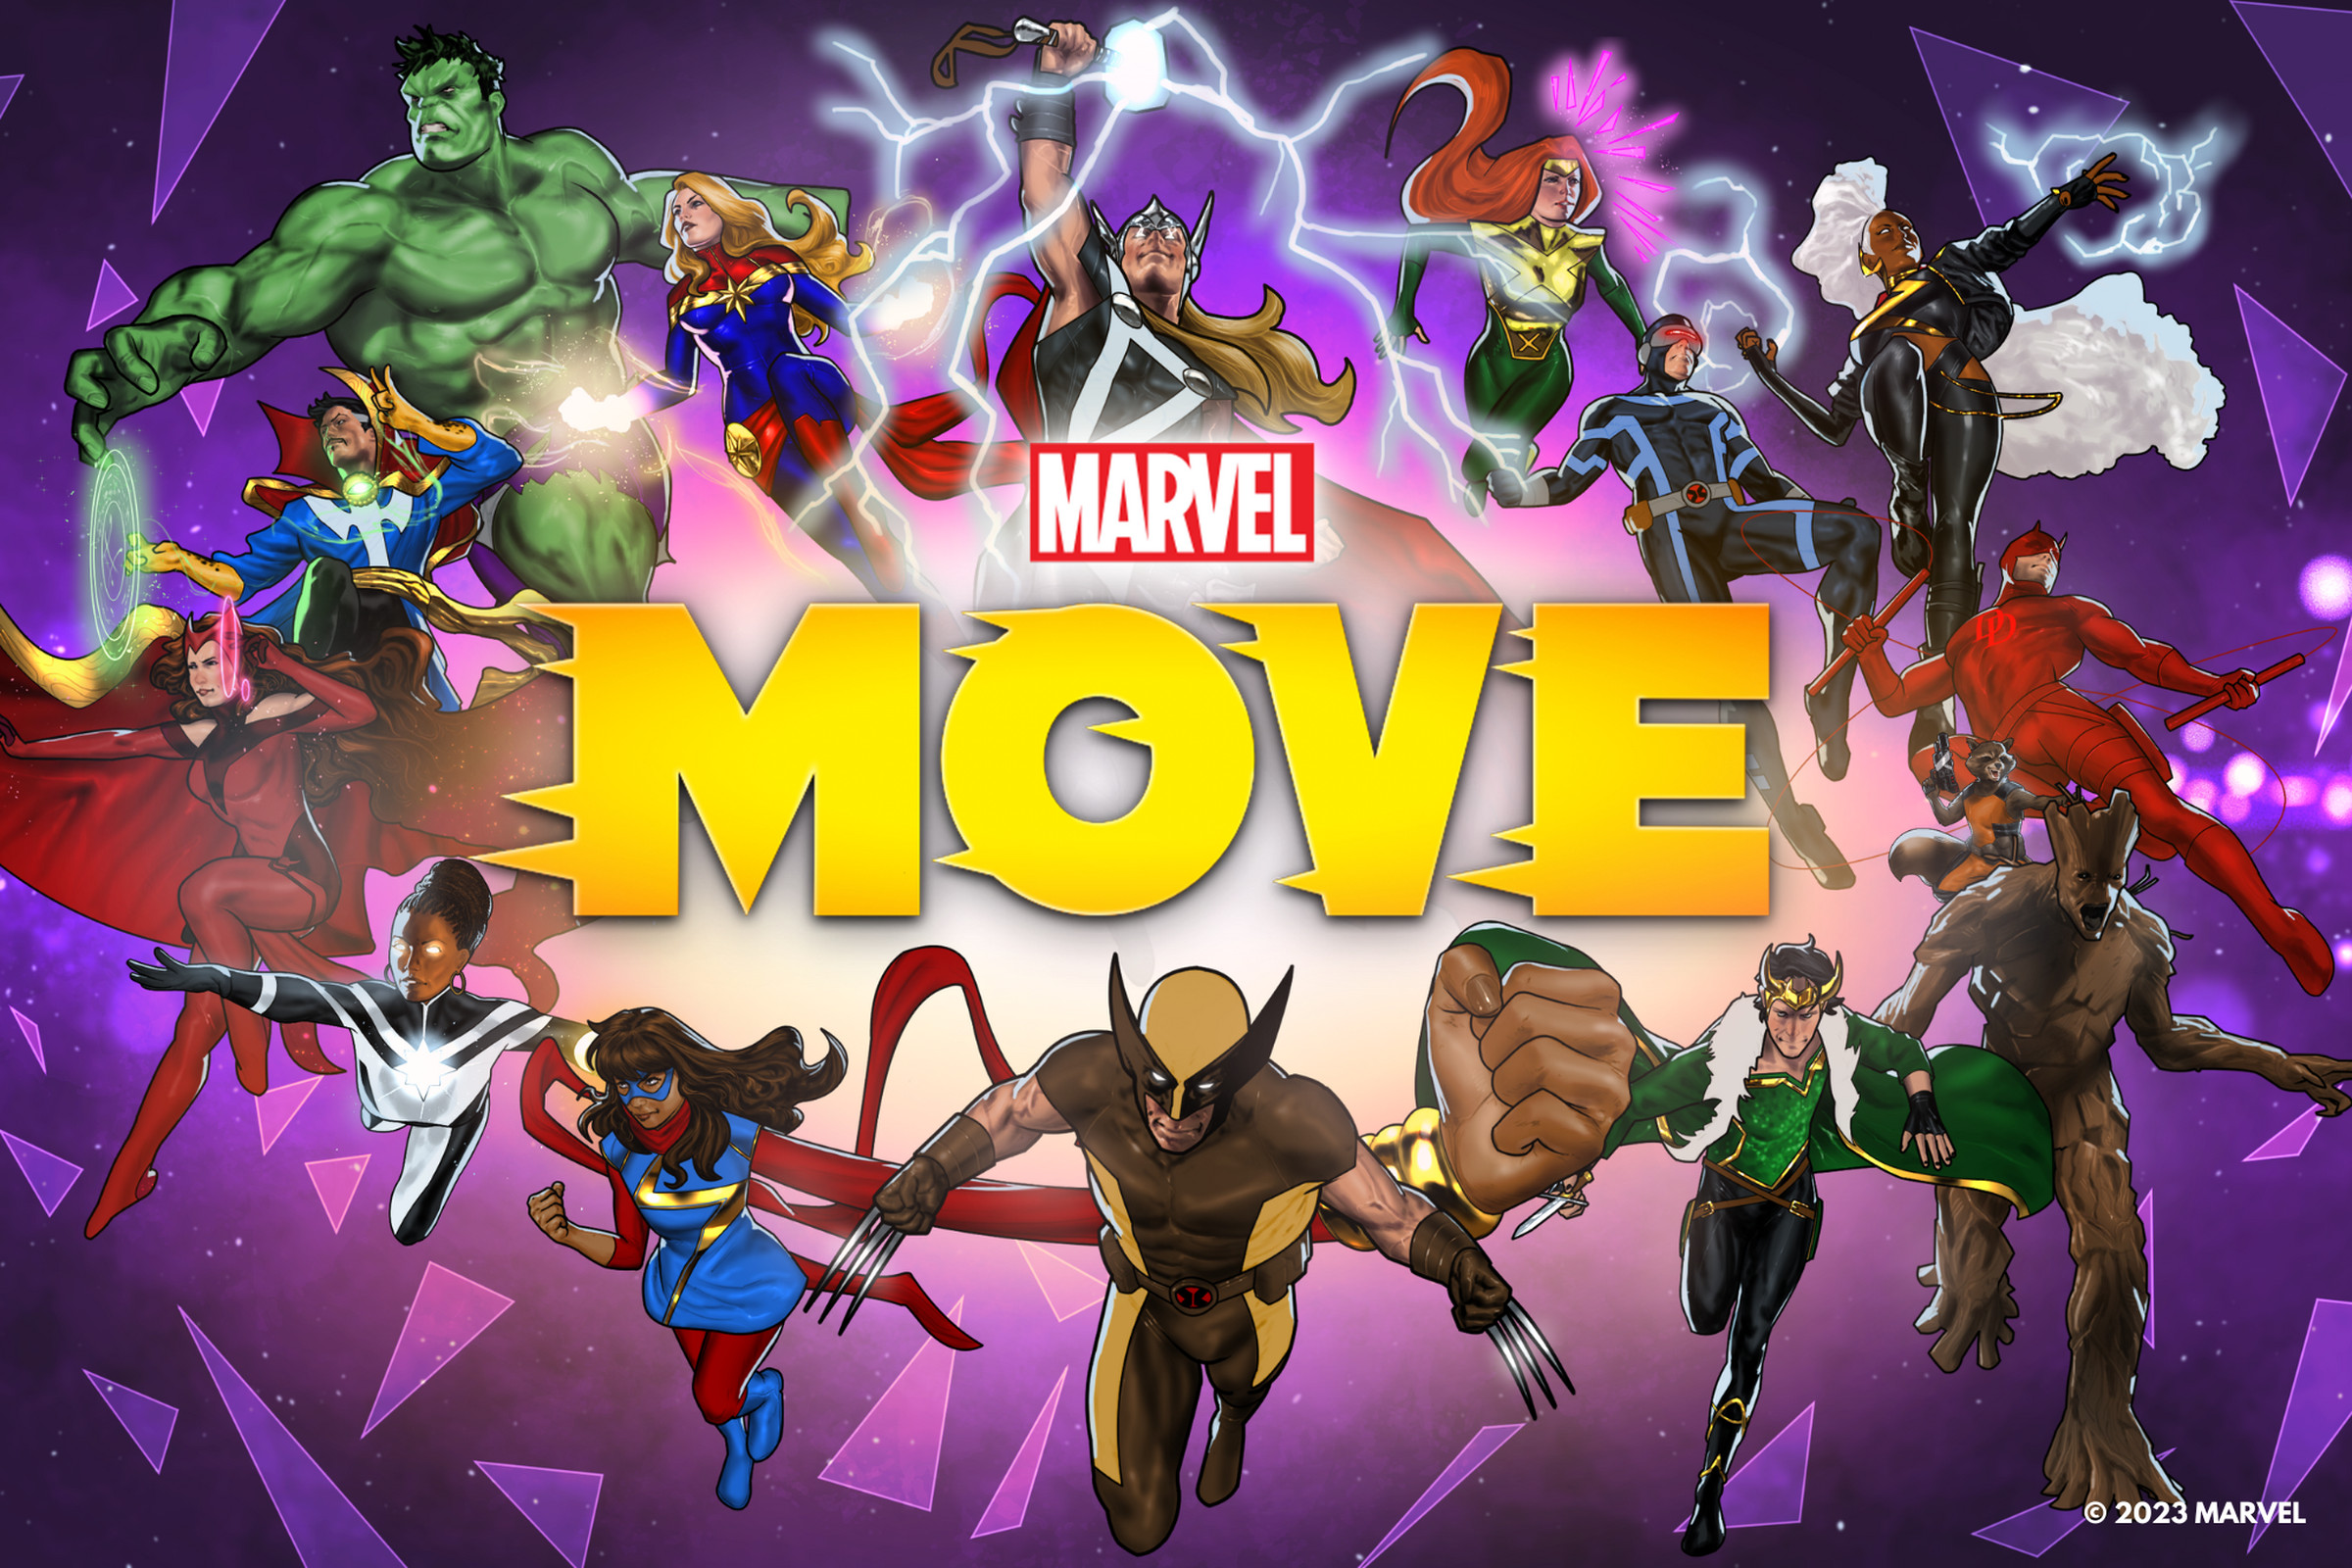 Promo image of Marvel Move featuring various characters like the X-Men, the Hulk, and Thor.